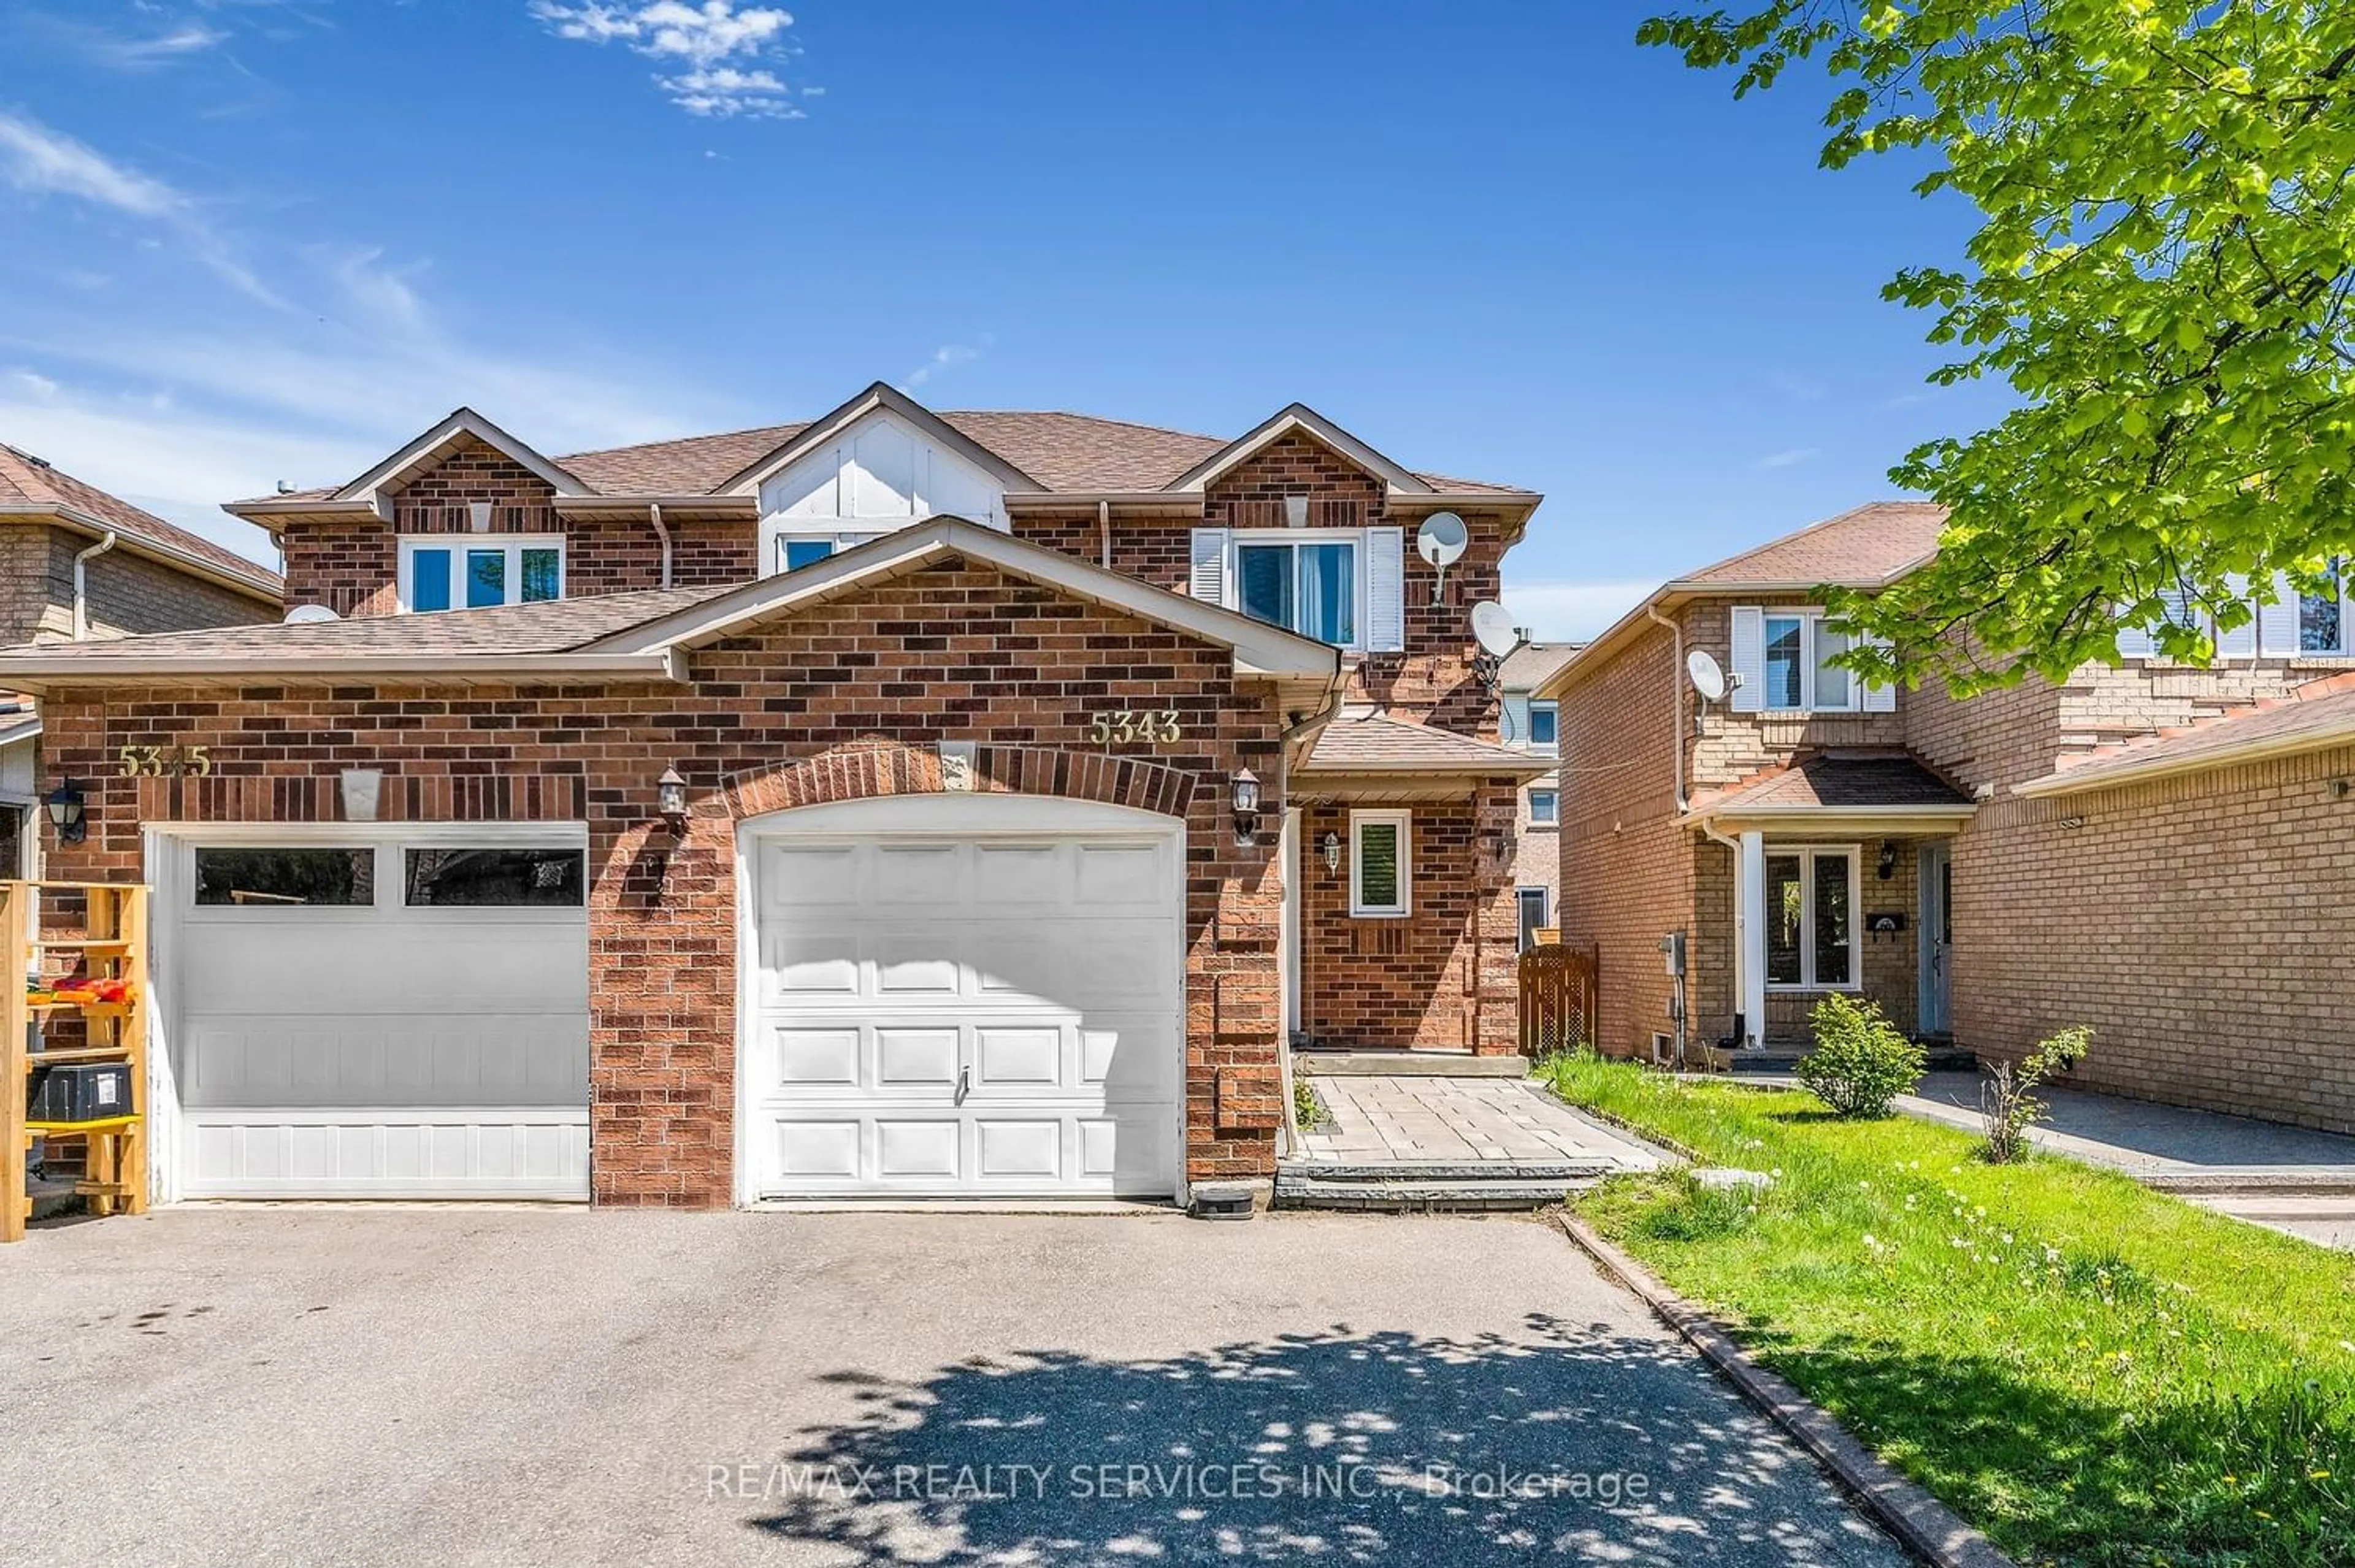 Home with brick exterior material for 5343 Bullrush Dr, Mississauga Ontario L5V 1Z2